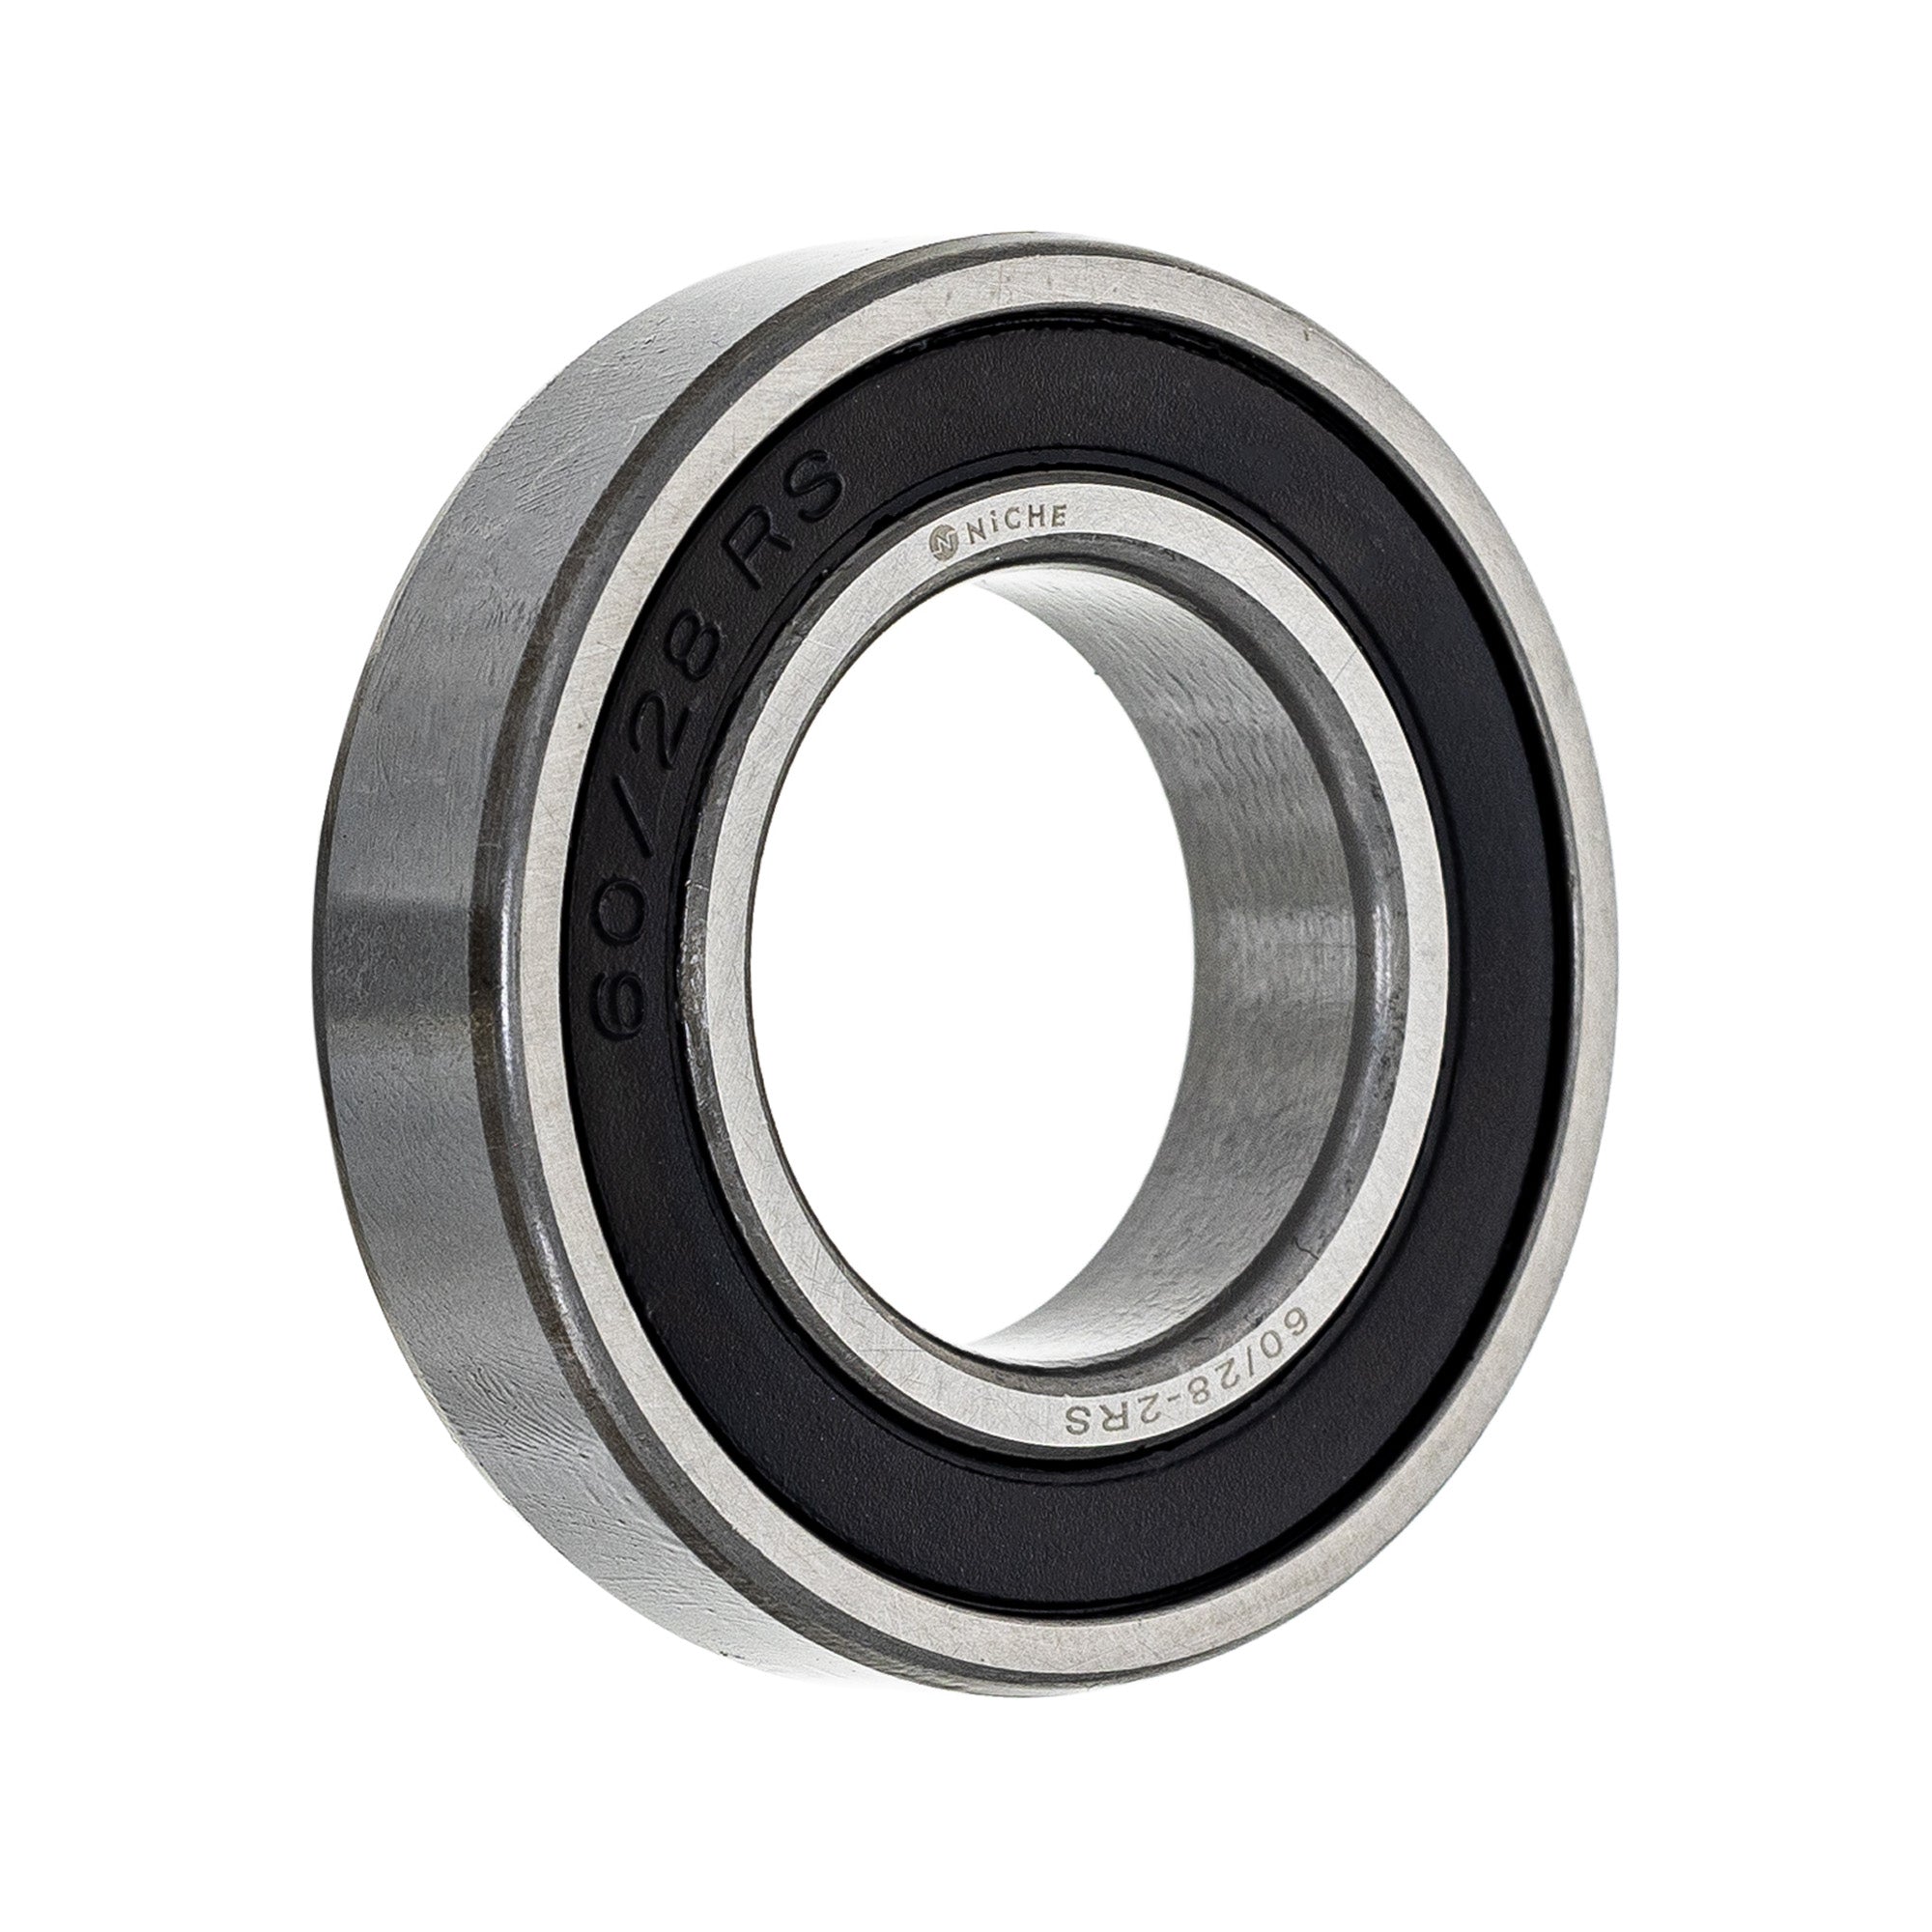 NICHE MK1008818 Bearing & Seal Kit for zOTHER YZF